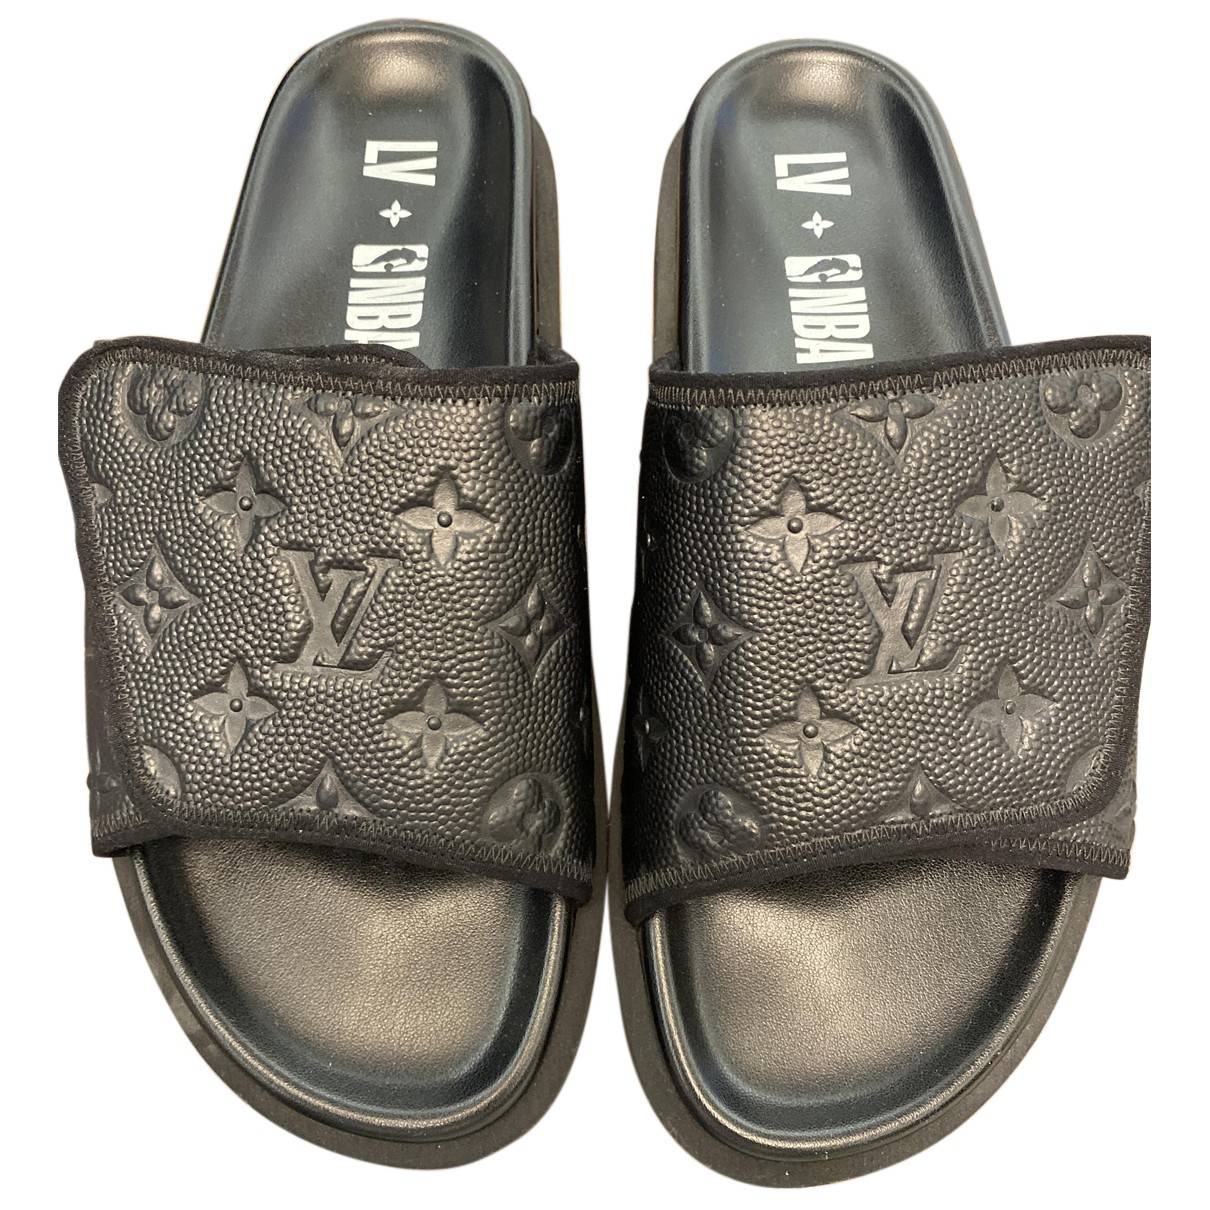 Leather sandals Louis Vuitton X NBA Black size 9.5 US in Leather